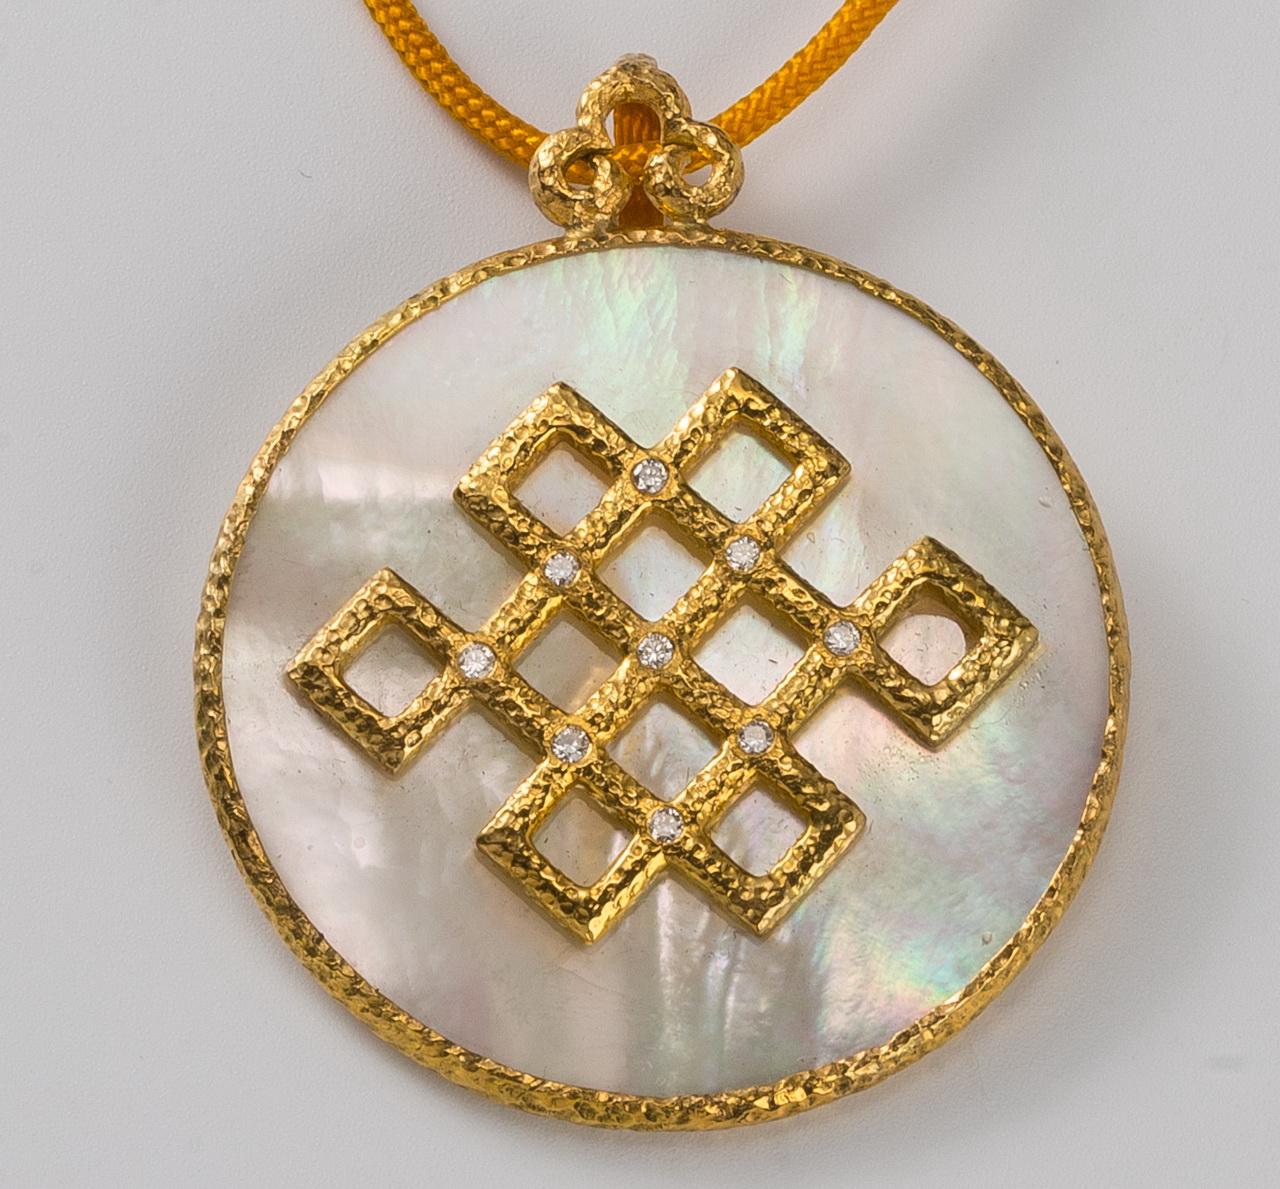 From our Heritage Collection of Chinoiserie designs, the luminous mother-of-pearl pendant is wrapped in hammered gold with an endless knot motif decorated with diamonds, 1 3/8 in (3.5cm) dia. The endless knot motif is a Buddhist symbol of eternity,